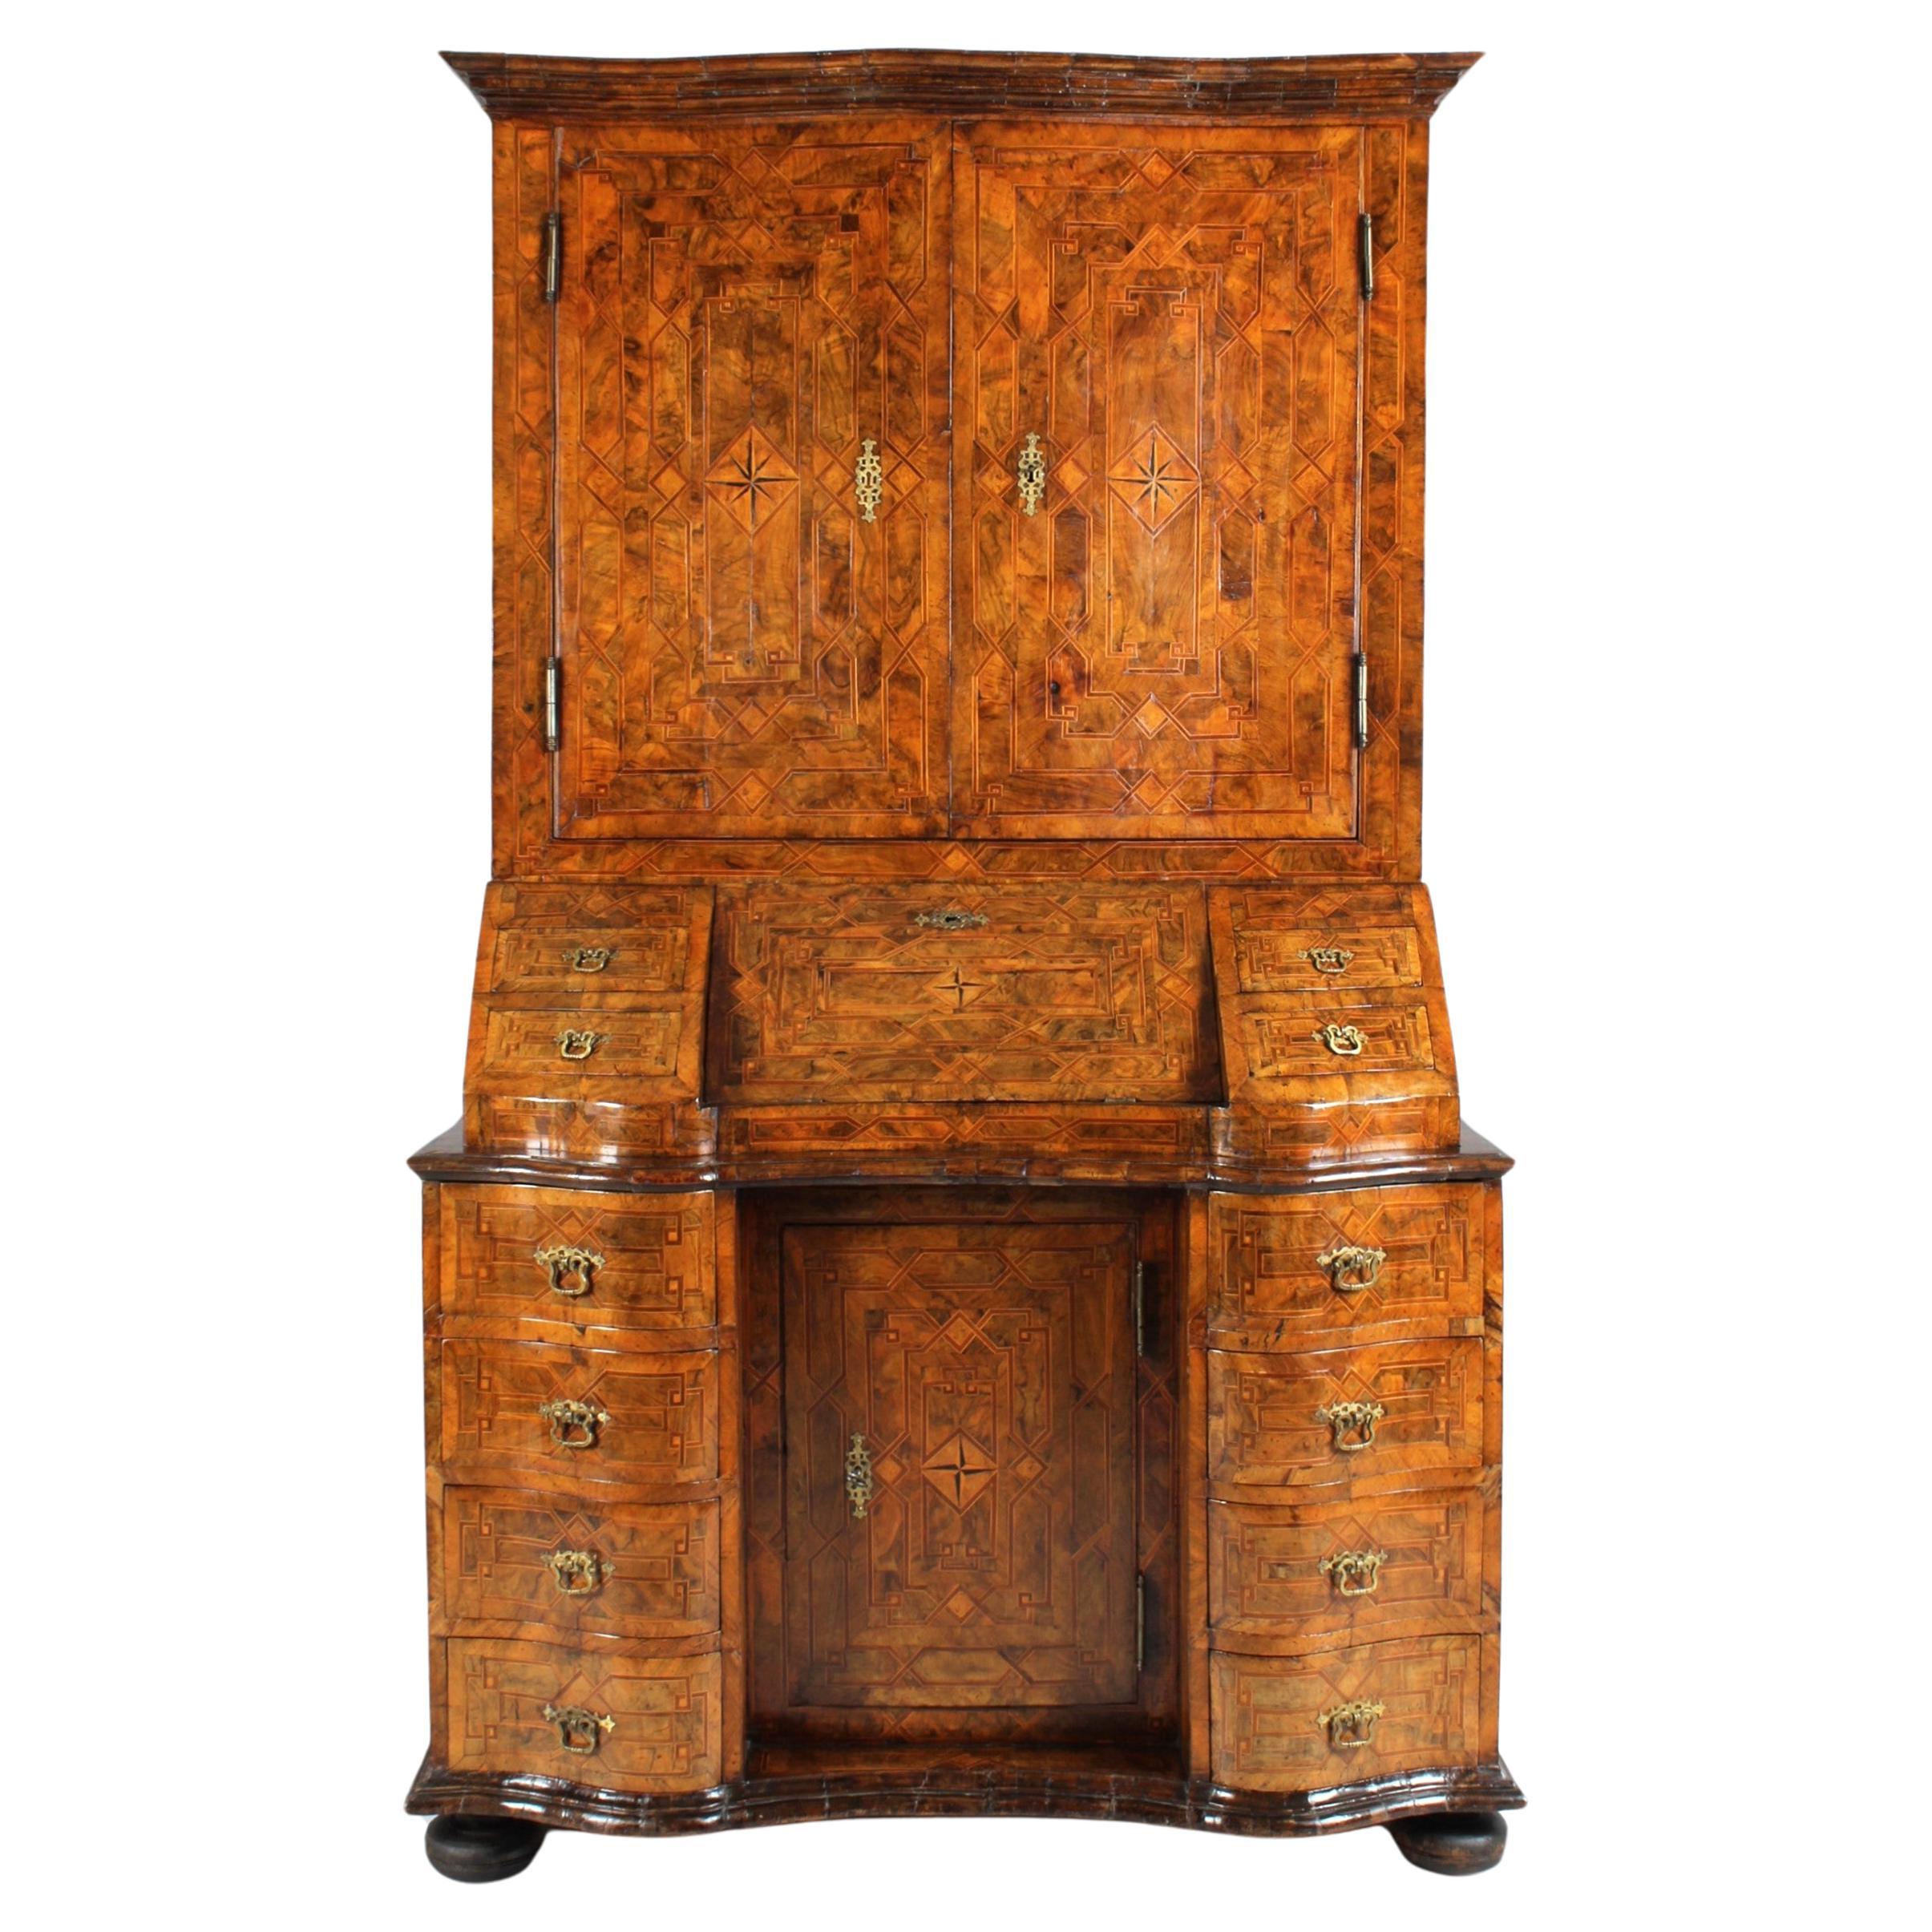 18th Century German Baroque Secretary with Marquetry and Patina, circa 1750 For Sale